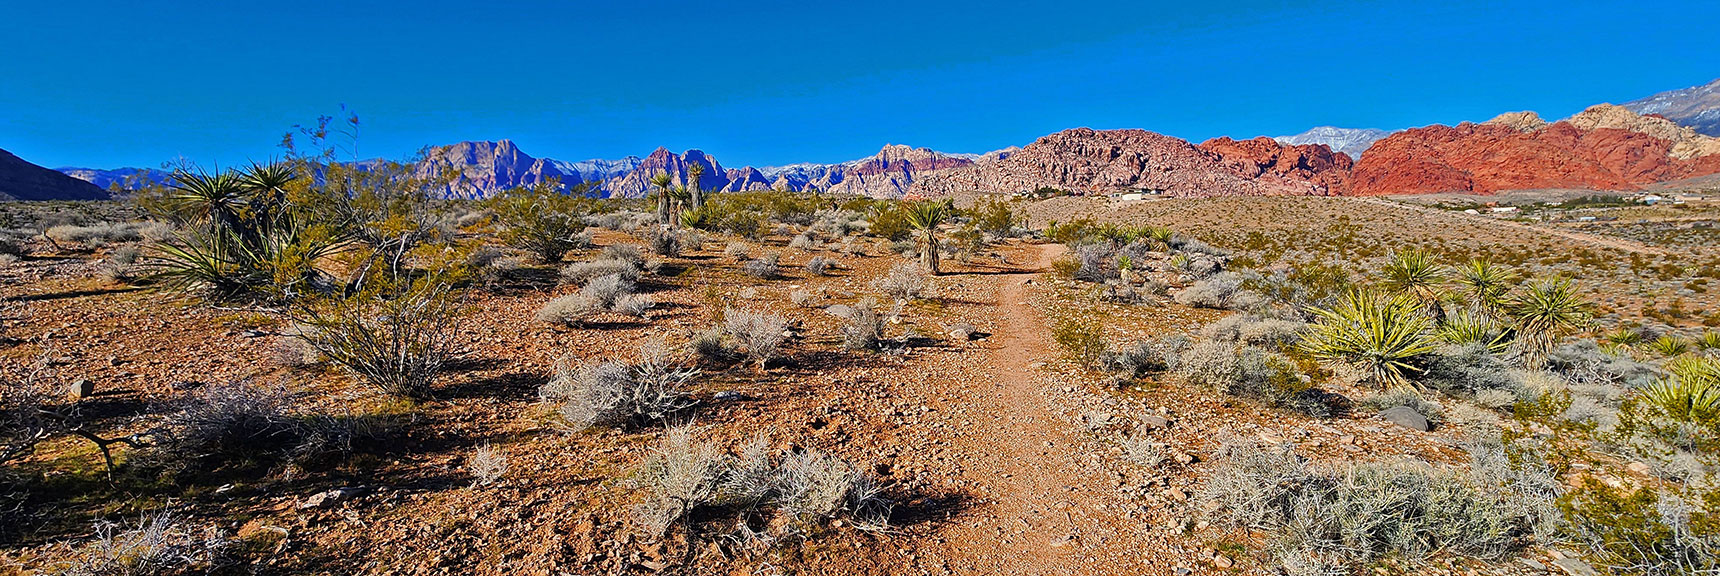 Great Trails You Can Walk, Run or Bike Just a Few Miles from Las Vegas | Calico Basin Daily Workout Trails | Calico Basin, Nevada